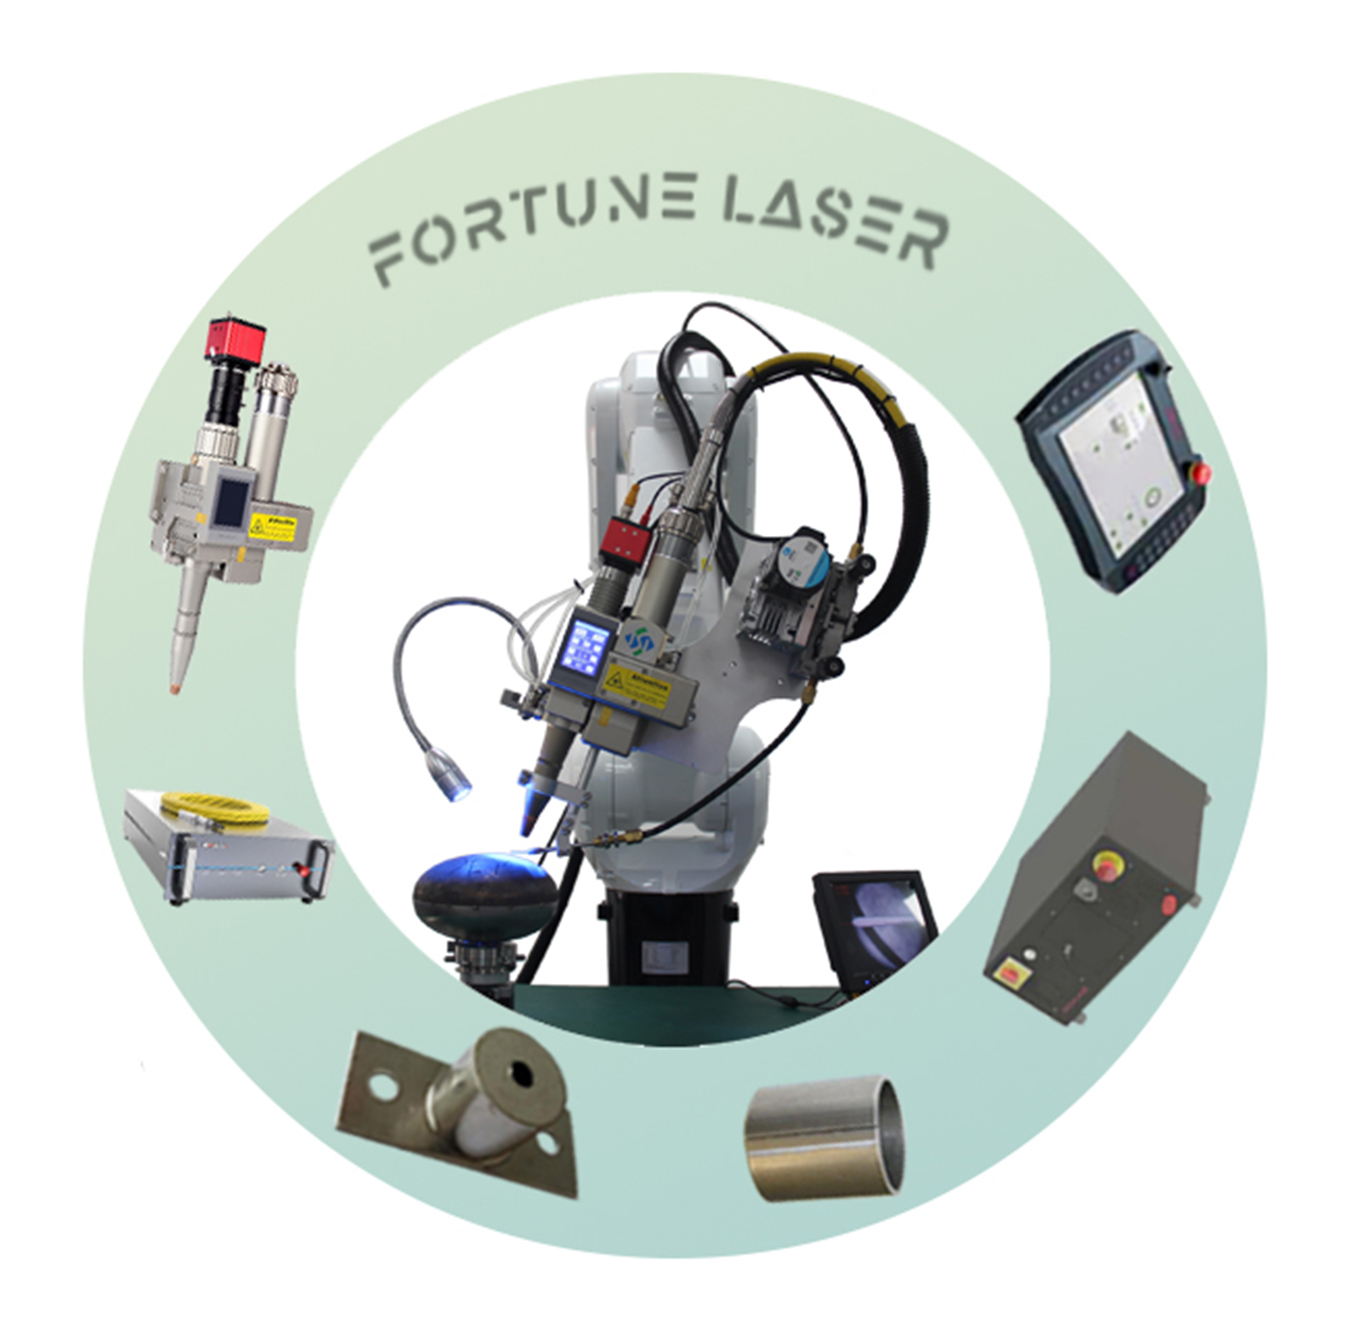 What are the advantages of robotic laser welding?